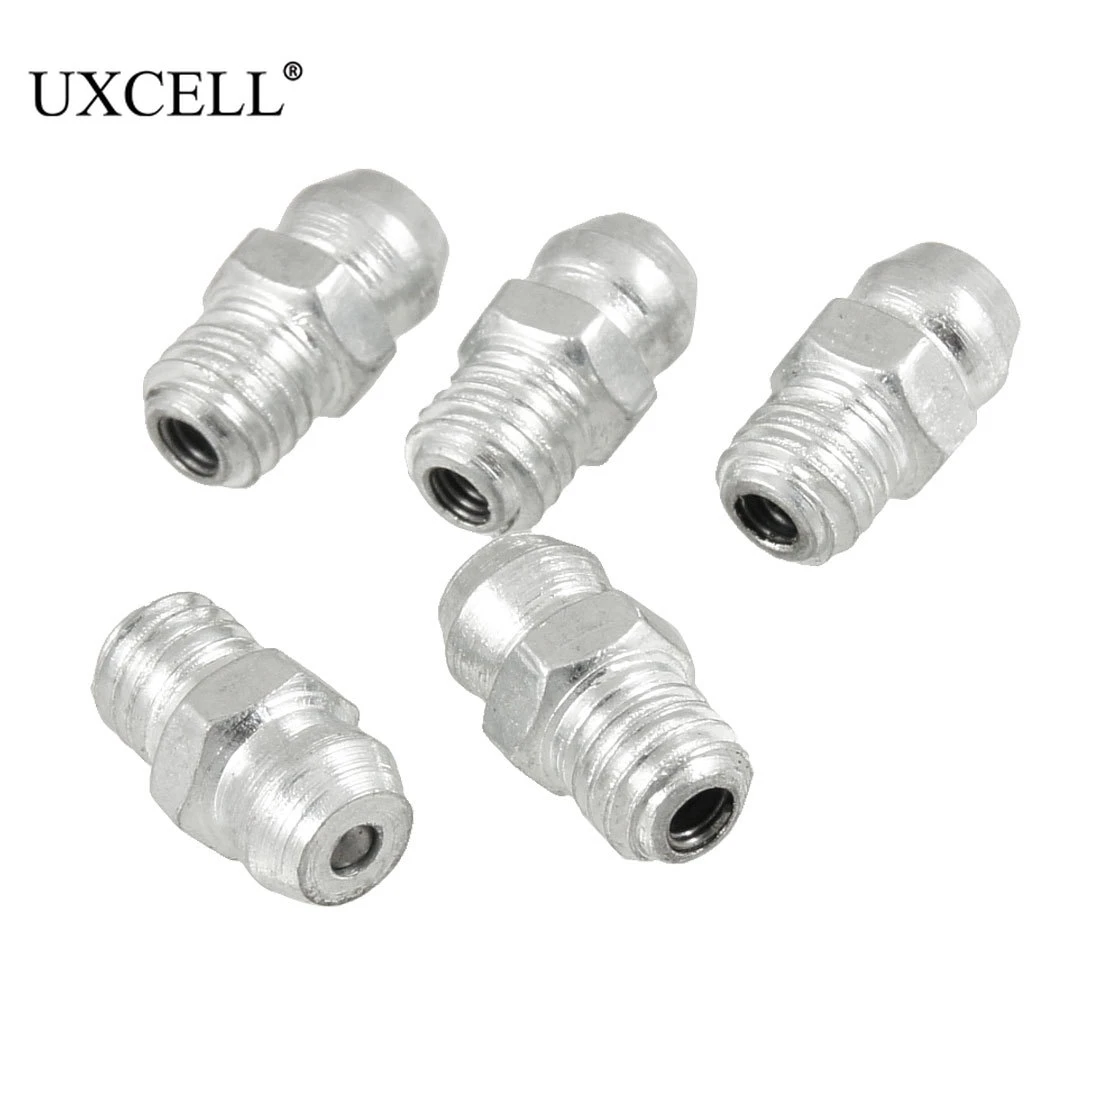 uxcell 20Pcs M6 x 1 Thread 90 Degree Angle Brass Grease Zerk Nipple Fitting for Car 